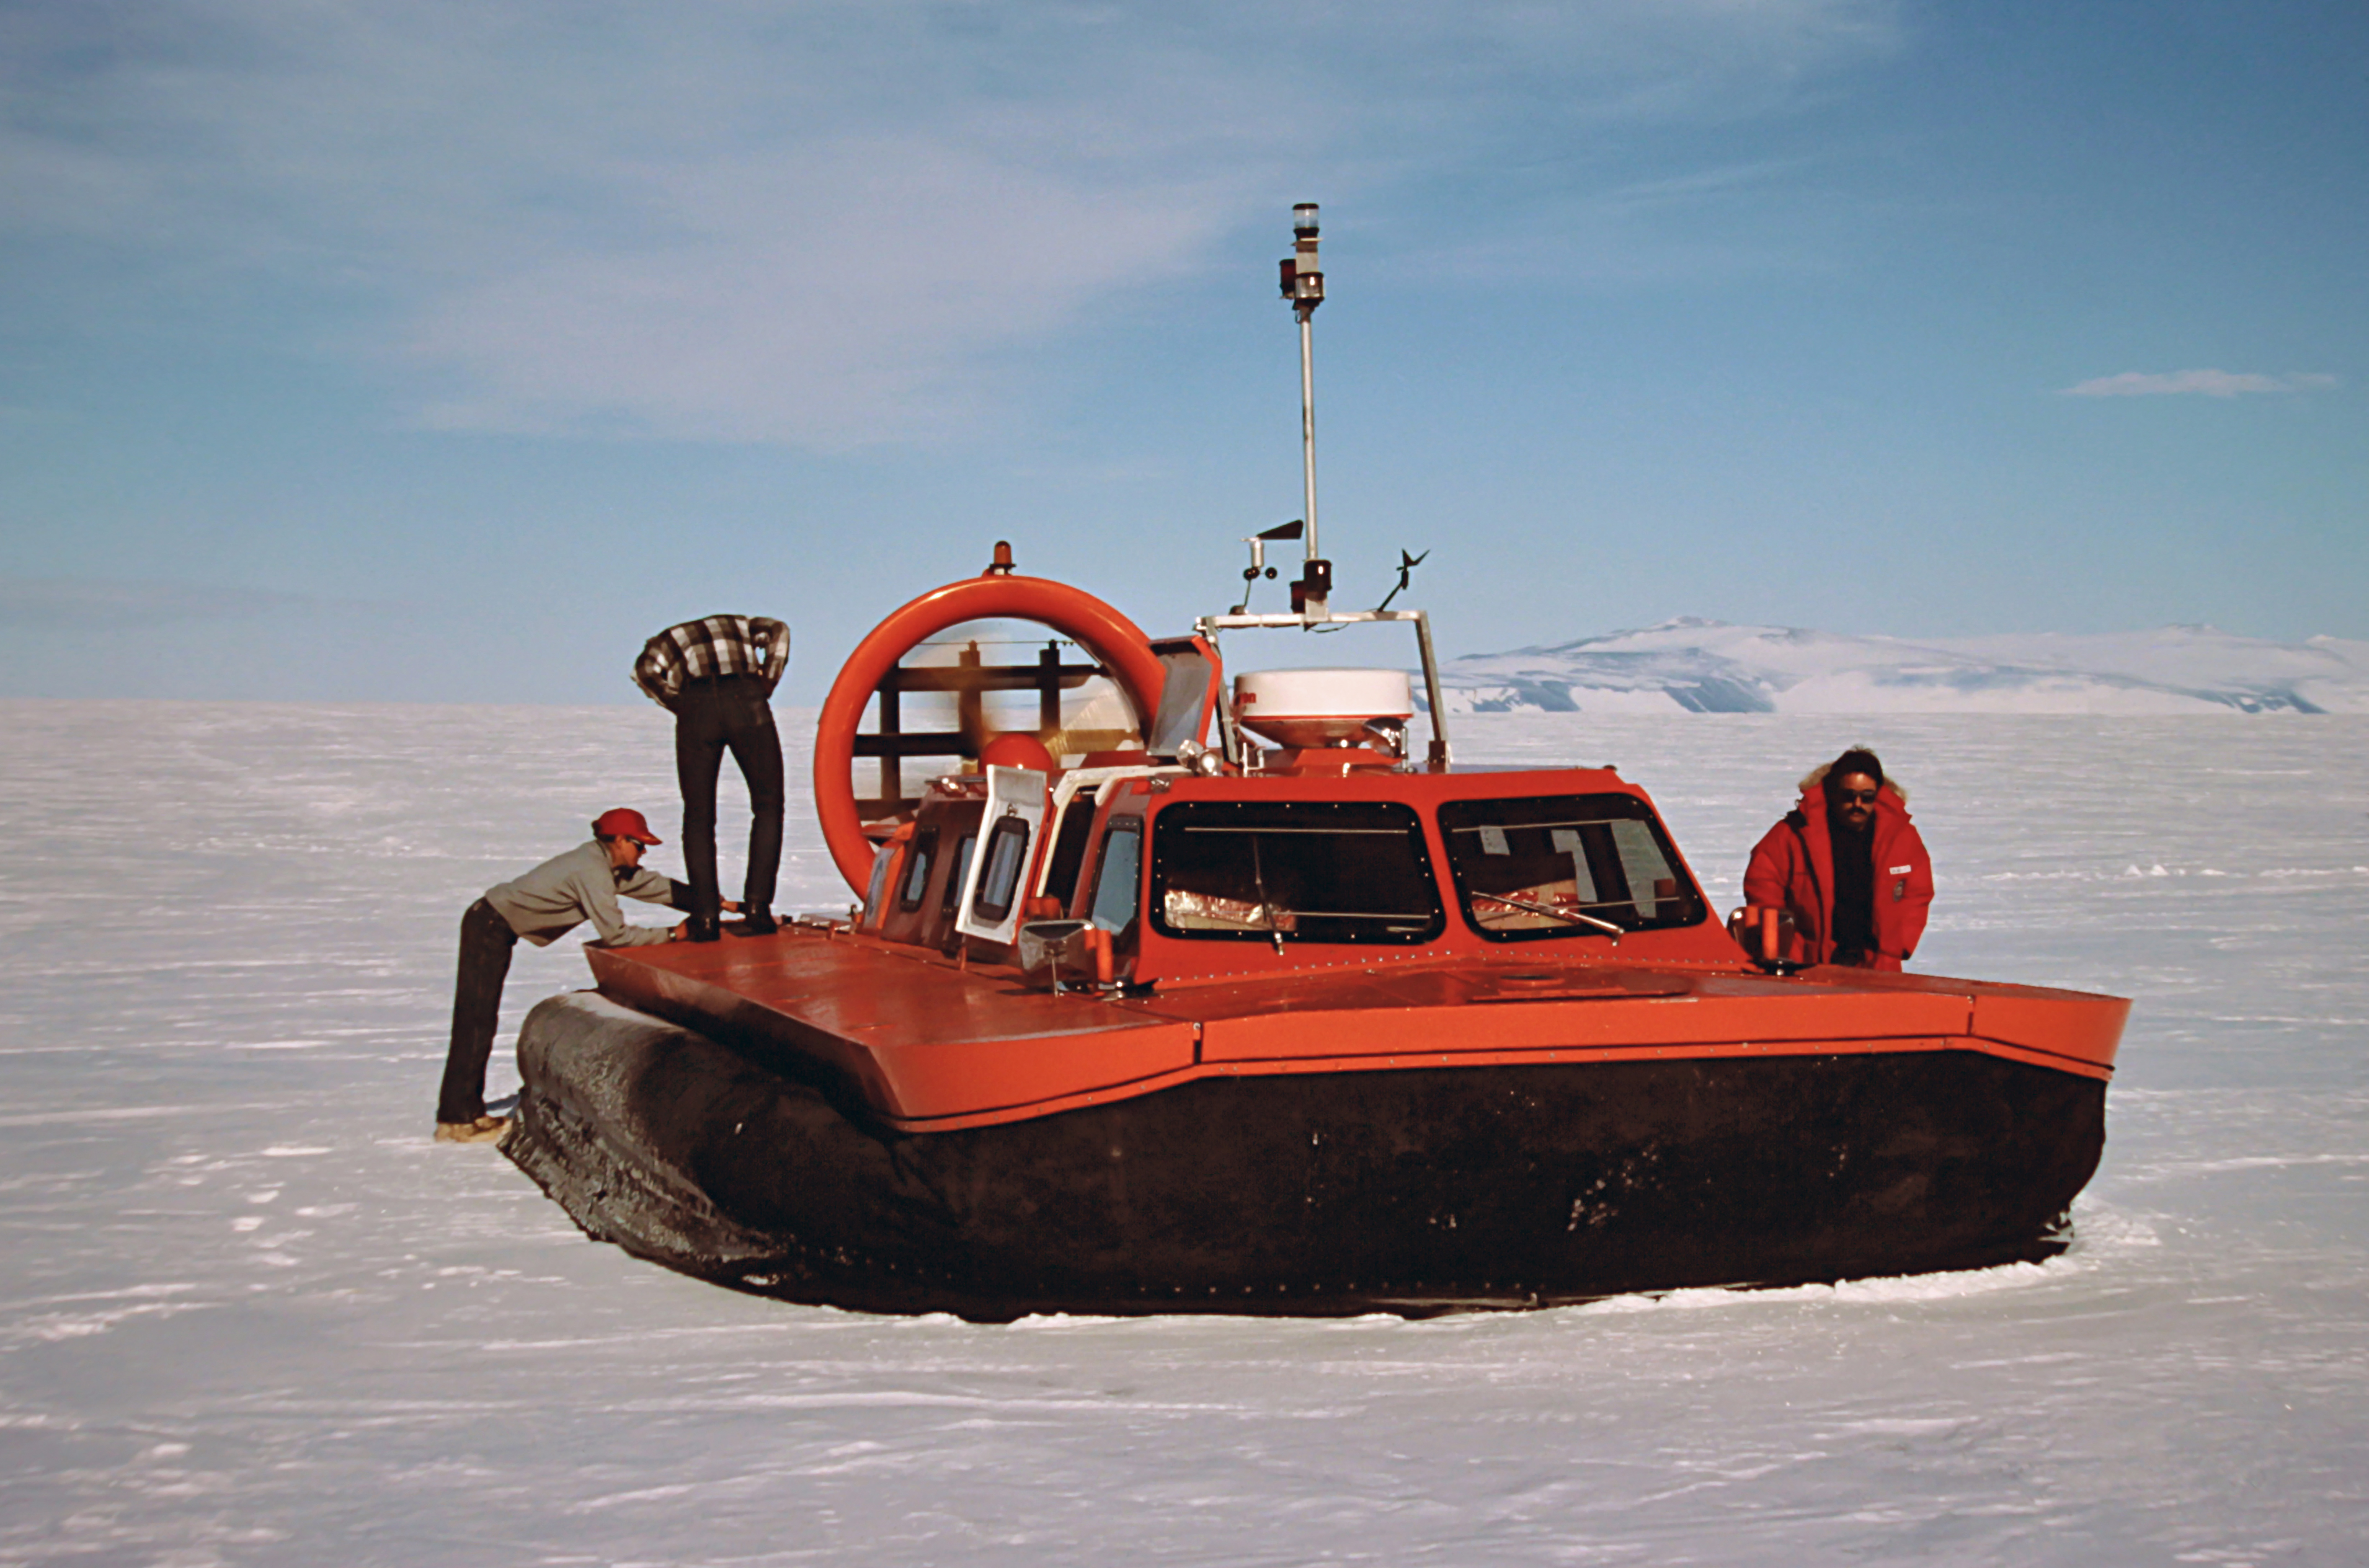 A red hovercraft parked on snowy terrain.
